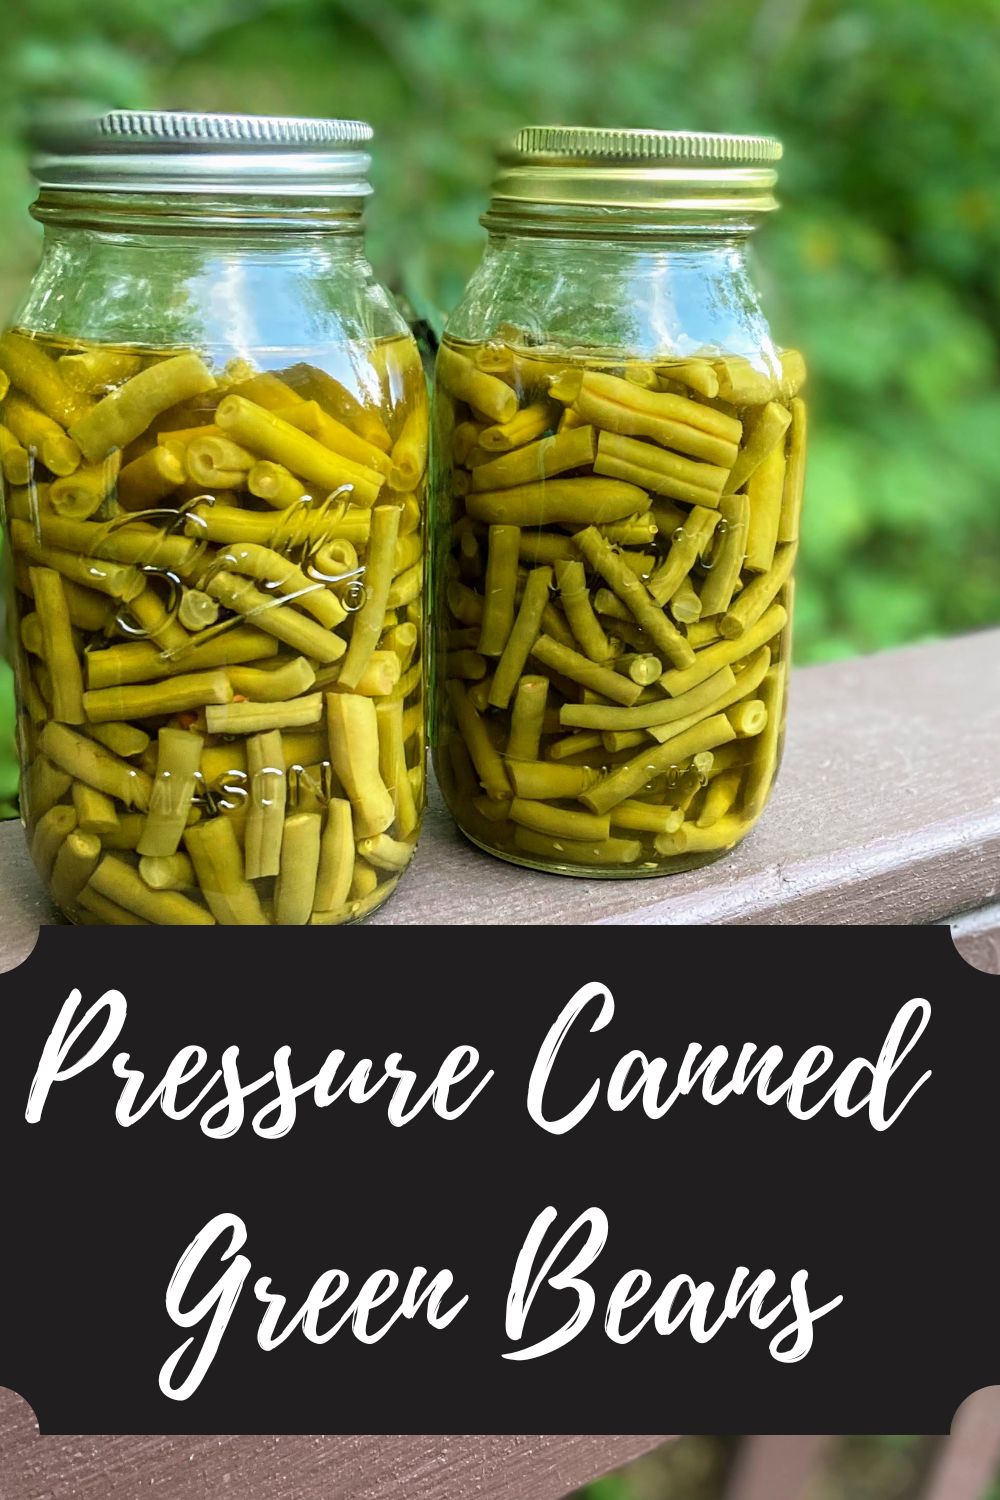 Pressure Canned Green Beans 